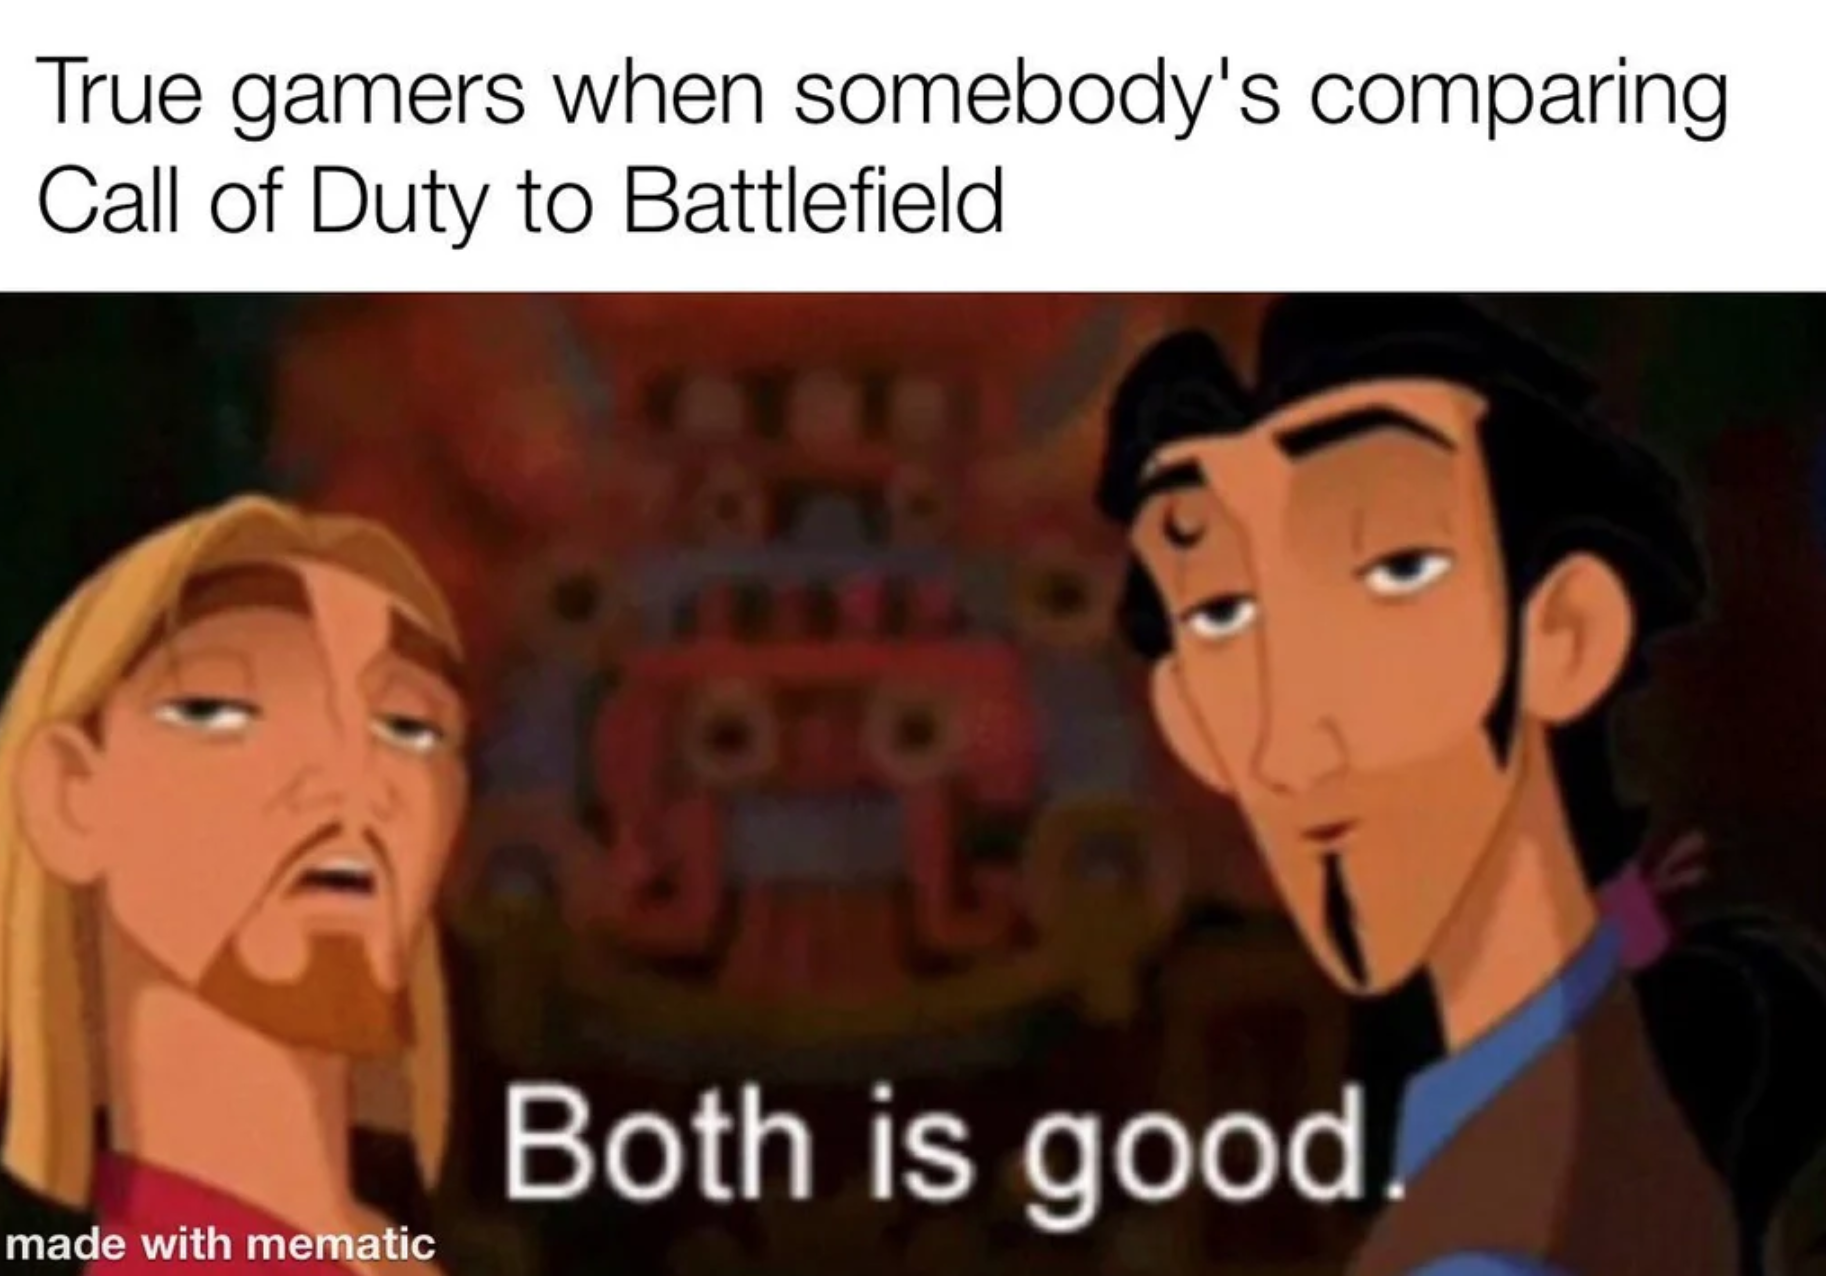 funny gaming memes  - both both both is good - True gamers when somebody's comparing Call of Duty to Battlefield Both is good. made with mematic